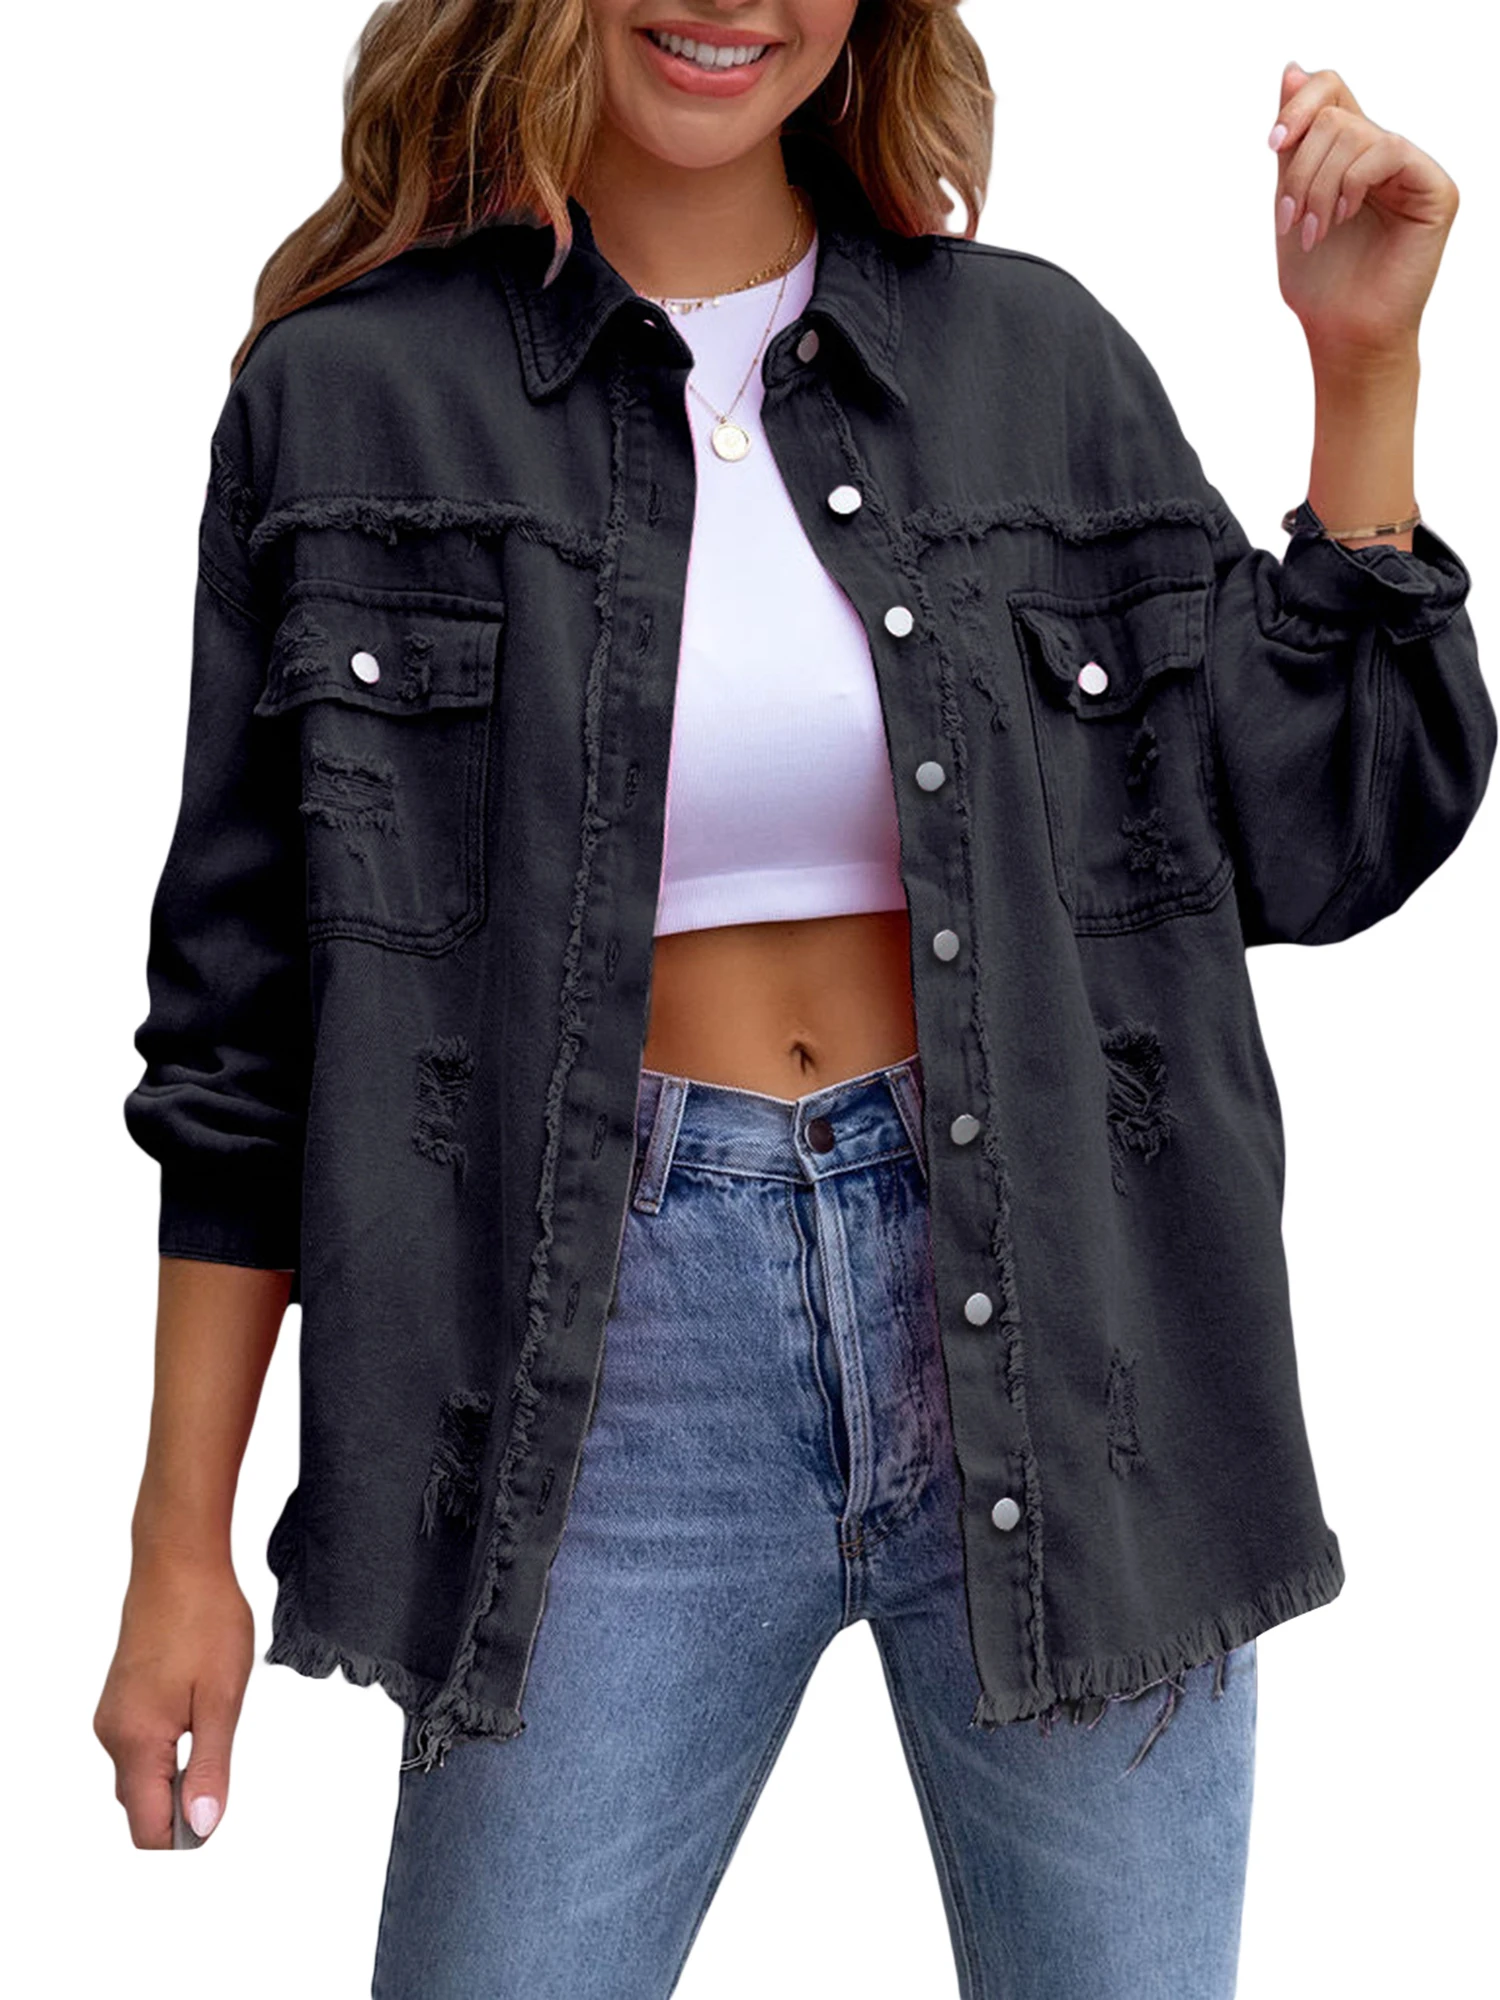 

Women s Oversized Distressed Denim Jacket with Ripped Holes and Frayed Edges - Stylish Long Sleeve Boyfriend Jean Coat for a